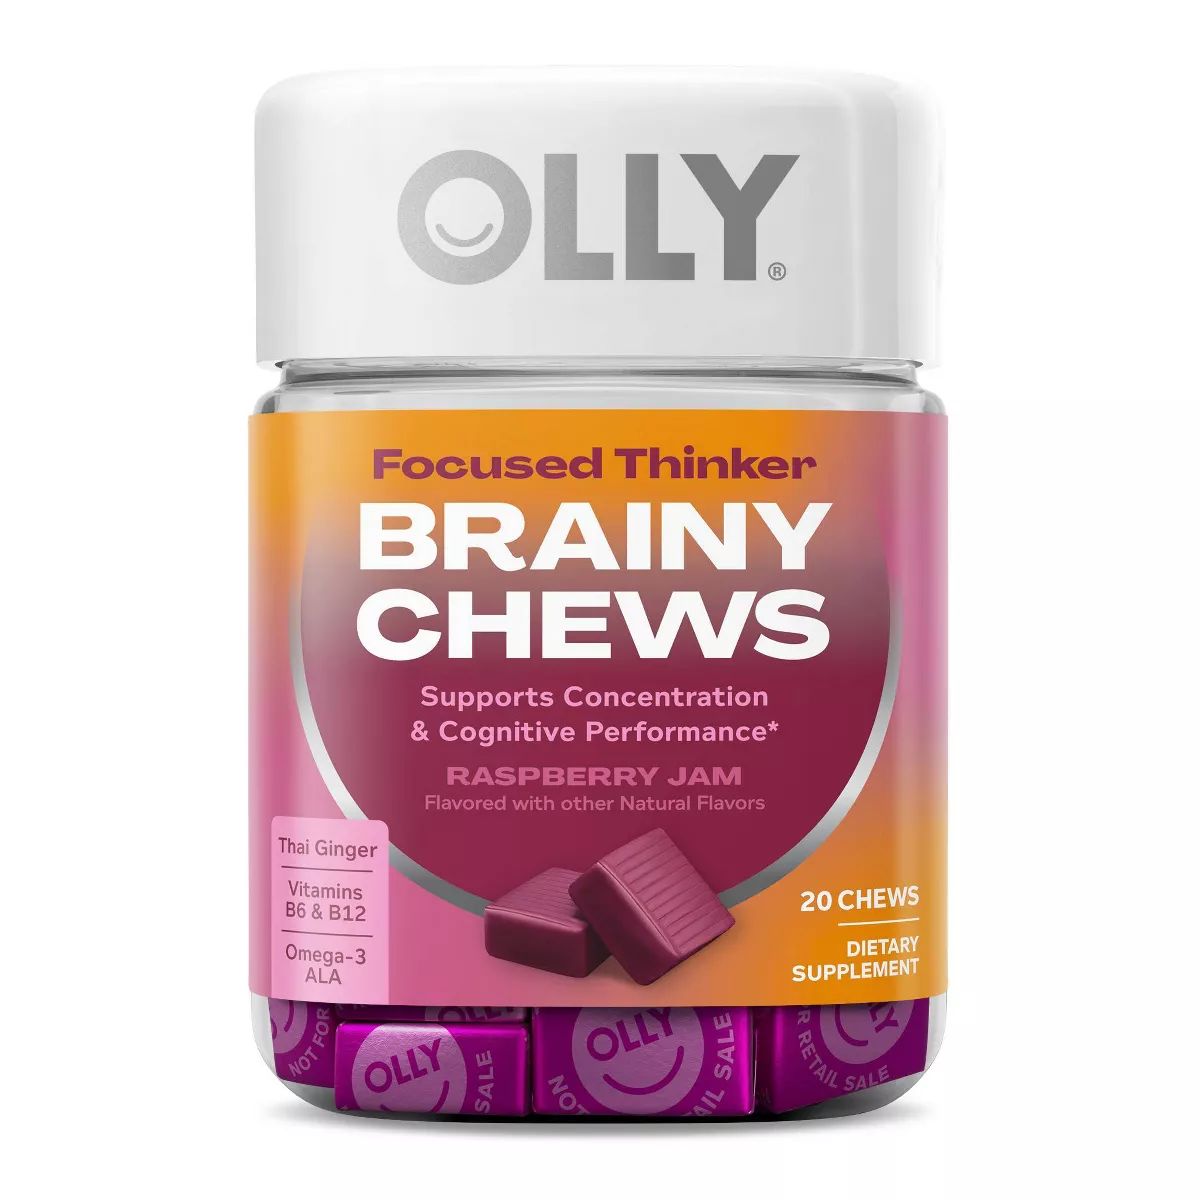 OLLY Brainy Chews - Focused Thinker - 20ct | Target